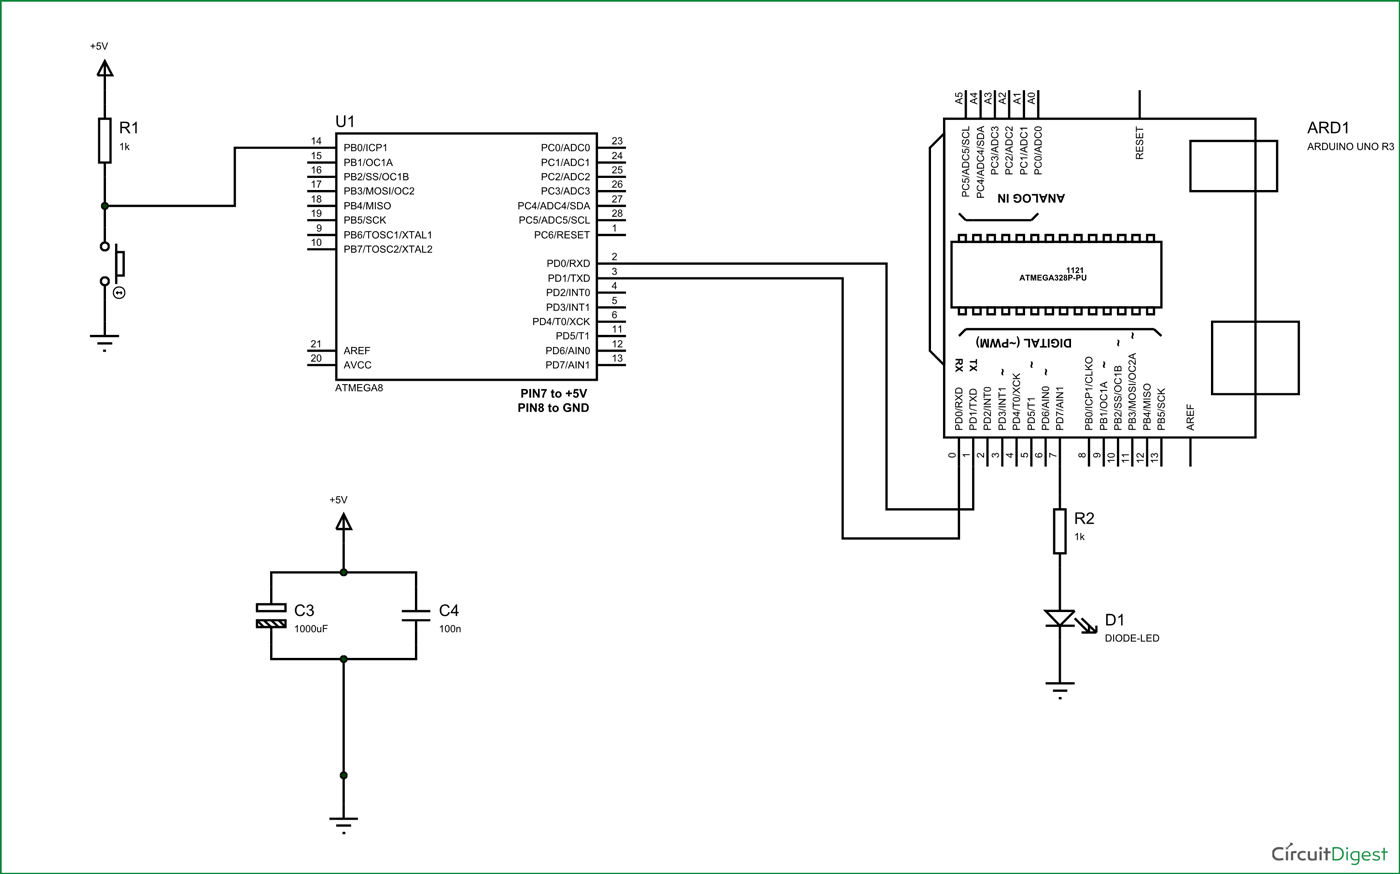 Circuit Diagram for UART Communication between ATmega8 and Arduino Uno